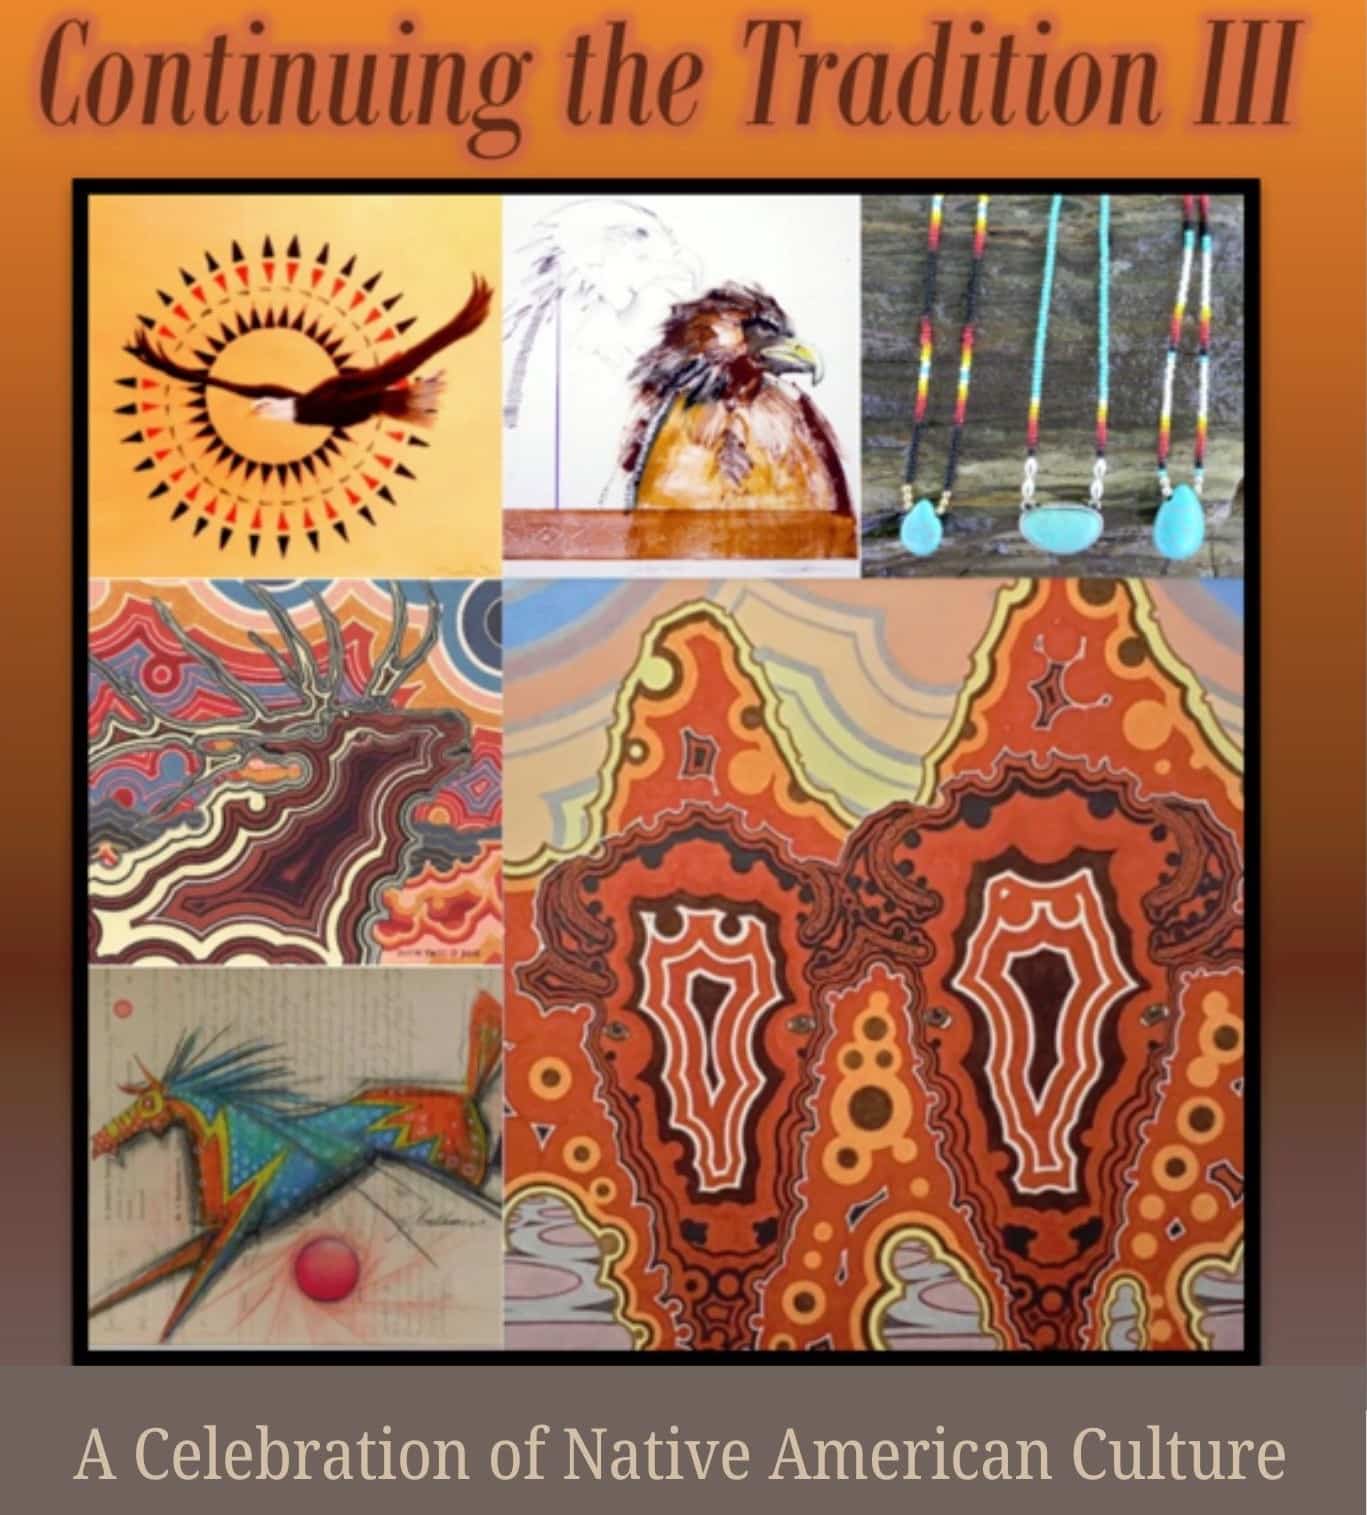 composite image of various Native American art including images of a horse, an eagle, beadwork, and agate-like patterns